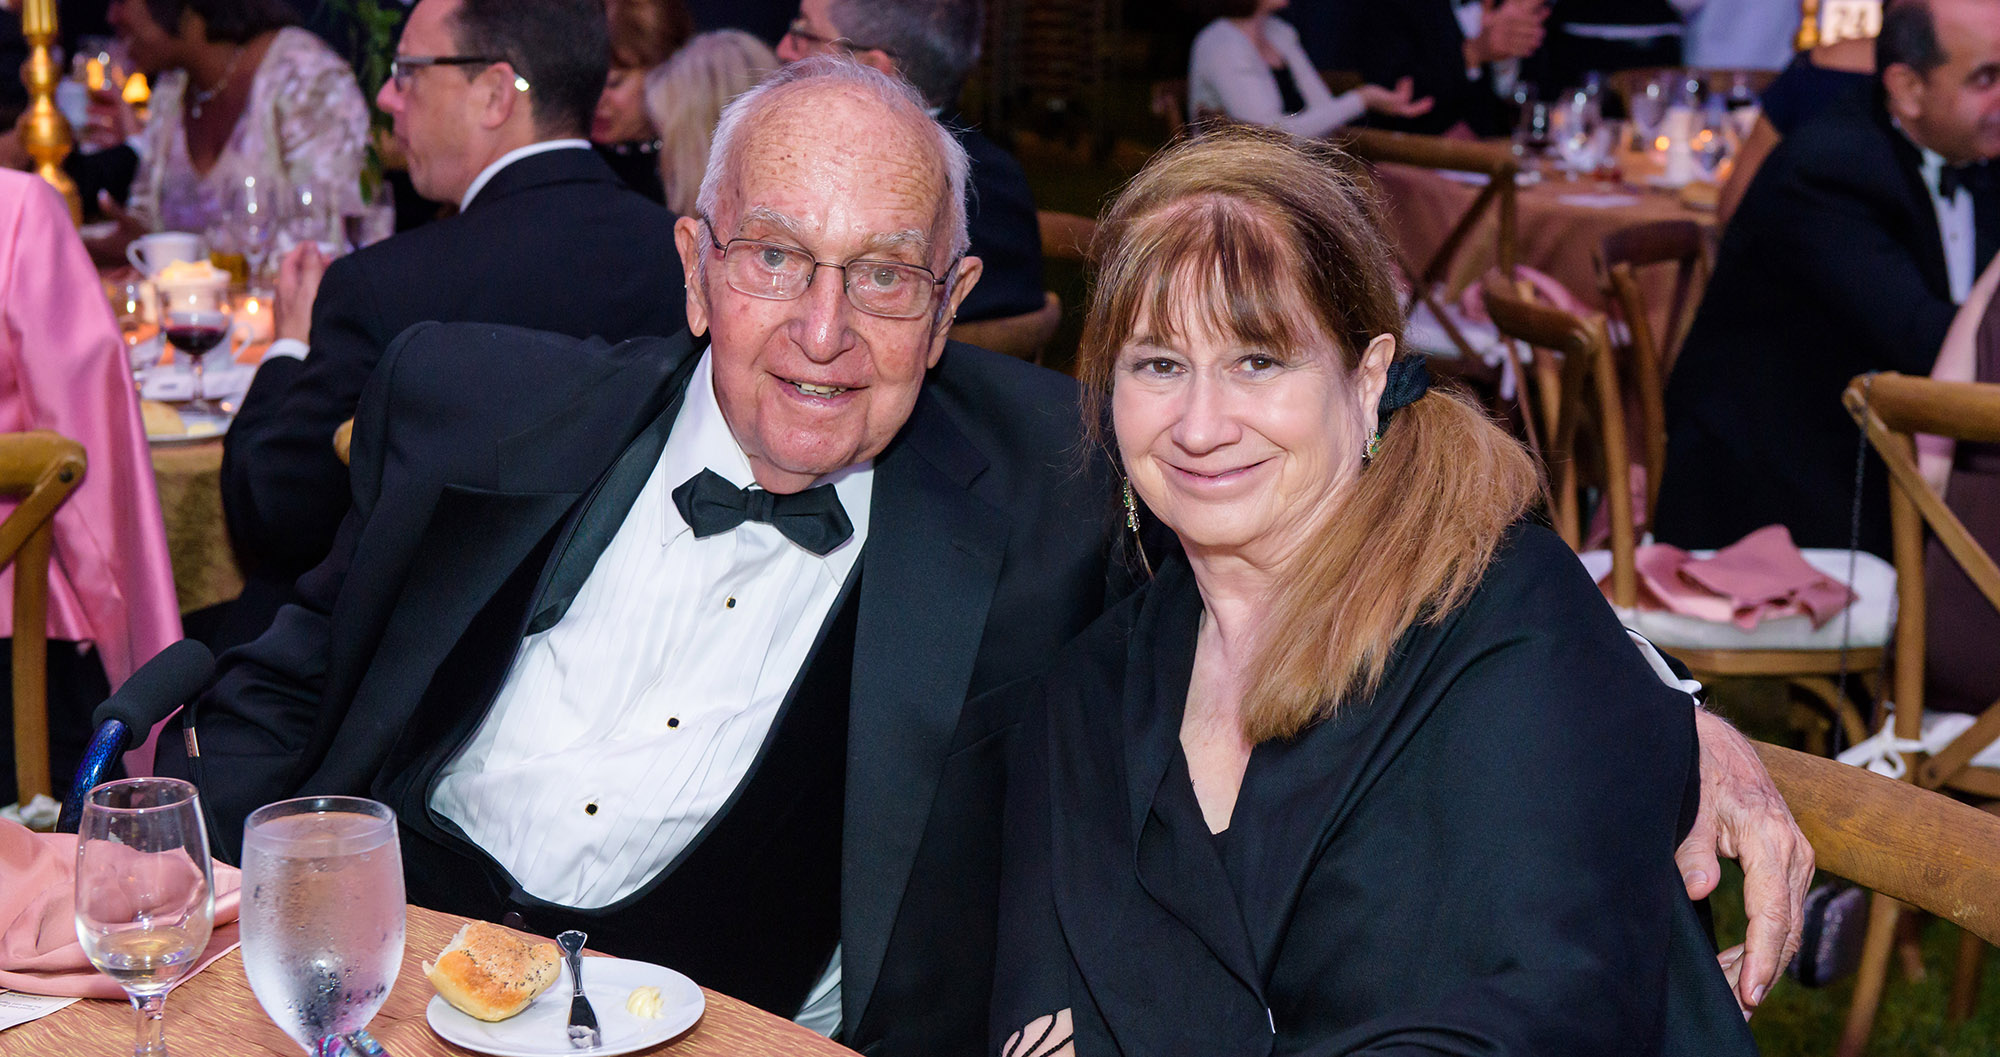 Edward Hennessy, BS'55 (Ruth), FDU trustee emeritus, left, and his daughter Beth Hennessy, at the annual Charter Day gala and fundraiser in 2019.